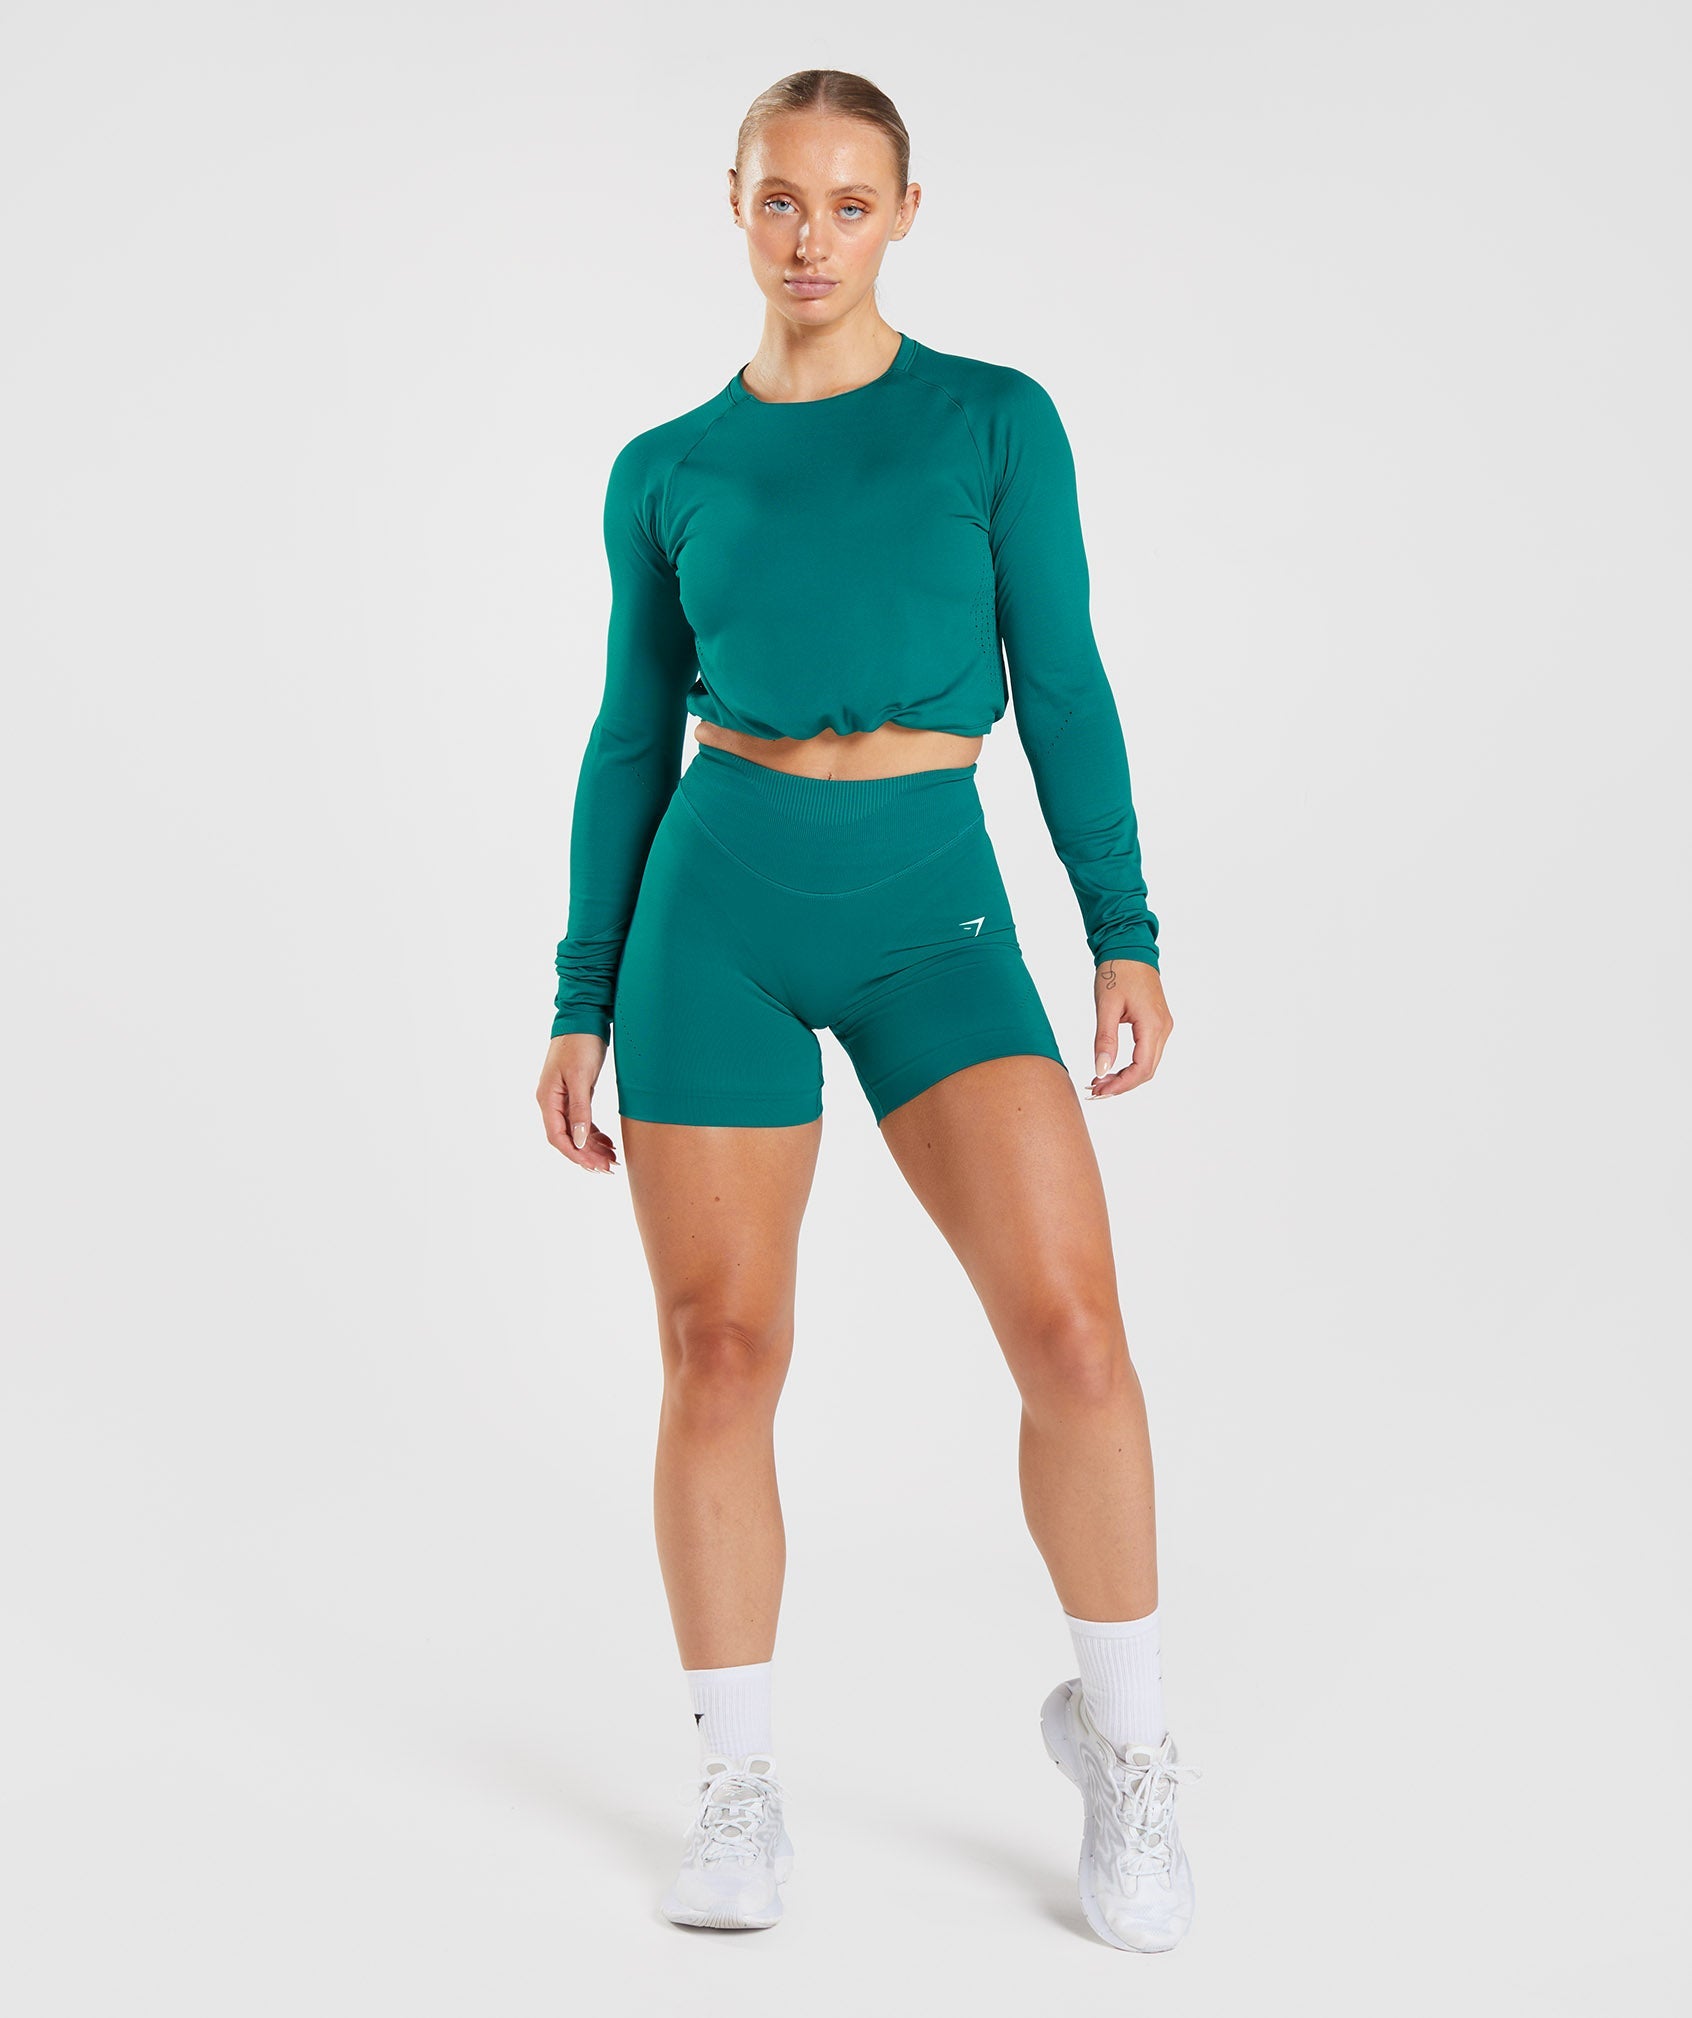 Sweat Seamless Long Sleeve Crop Top in Rich Teal - view 4